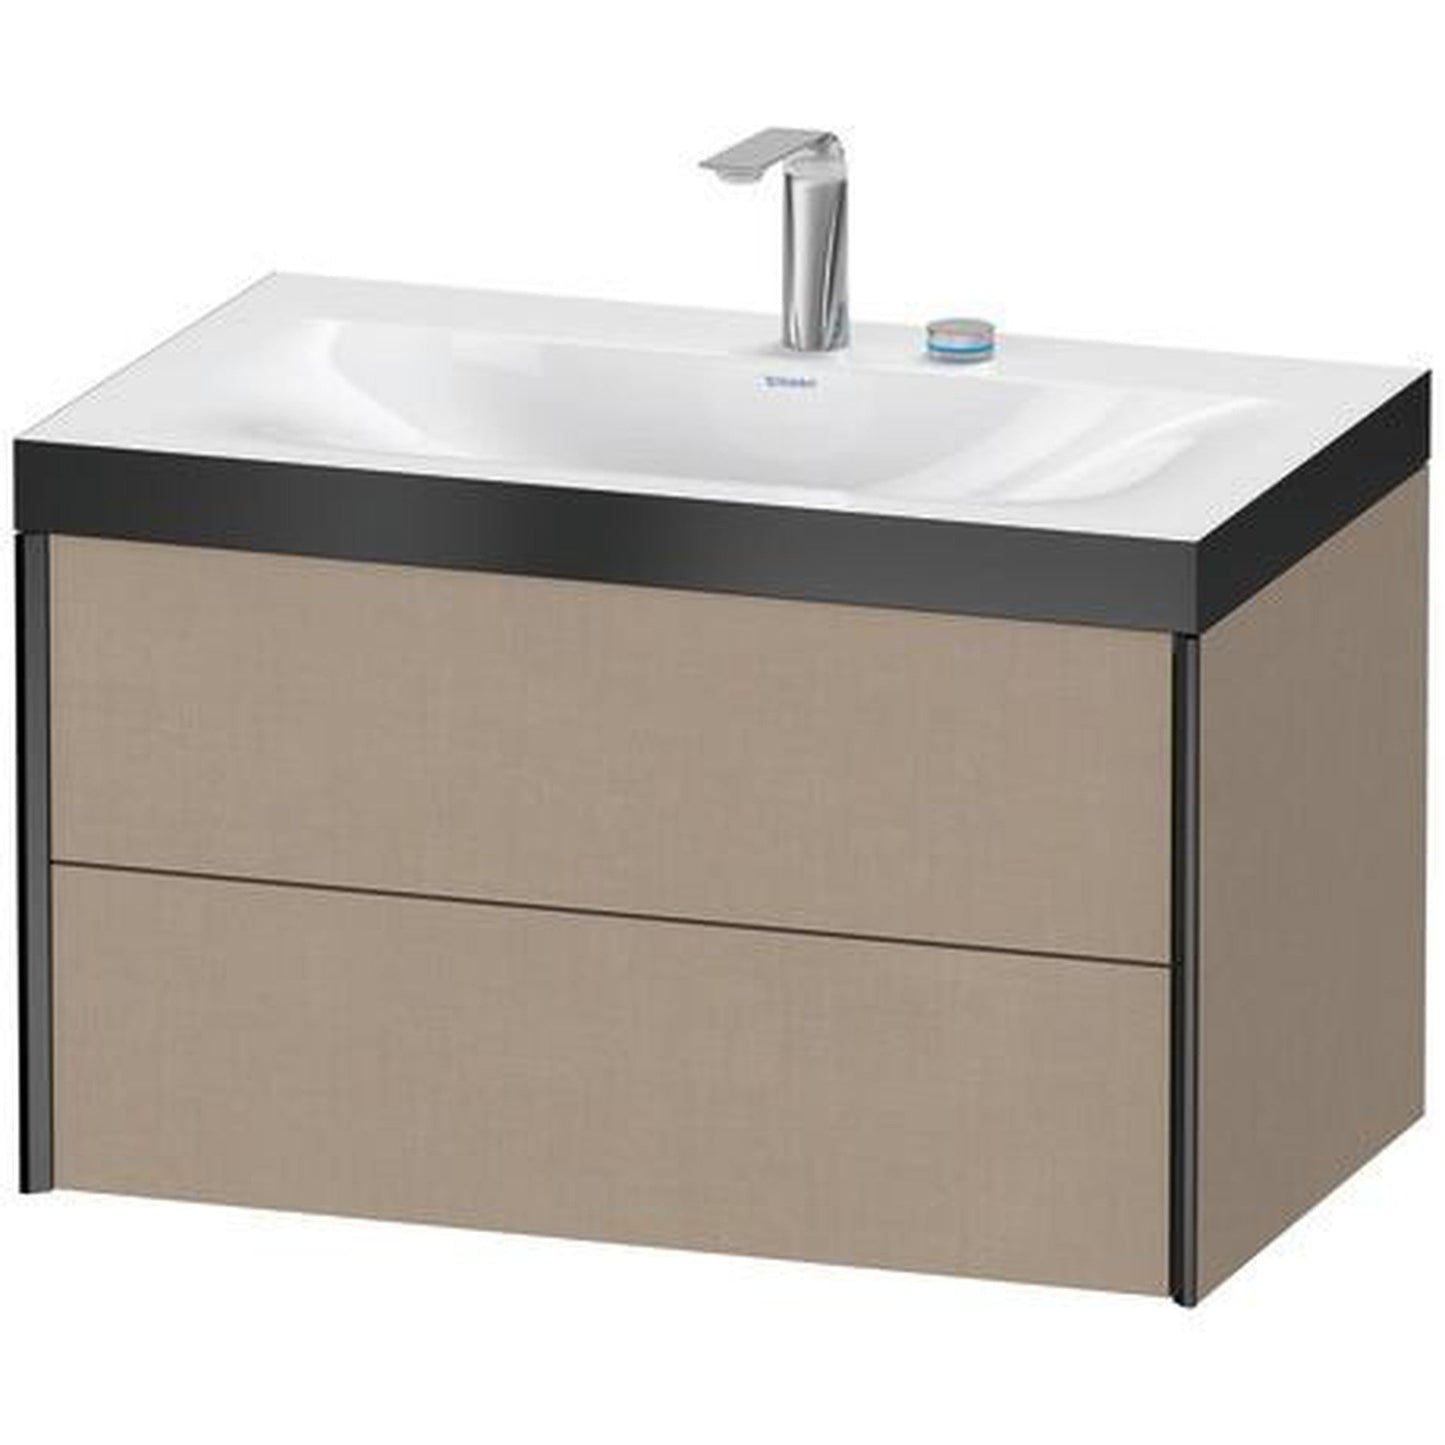 Duravit Xviu 31" x 20" x 19" Two Drawer C-Bonded Wall-Mount Vanity Kit With Two Tap Holes, Walnut (XV4615EB279C)